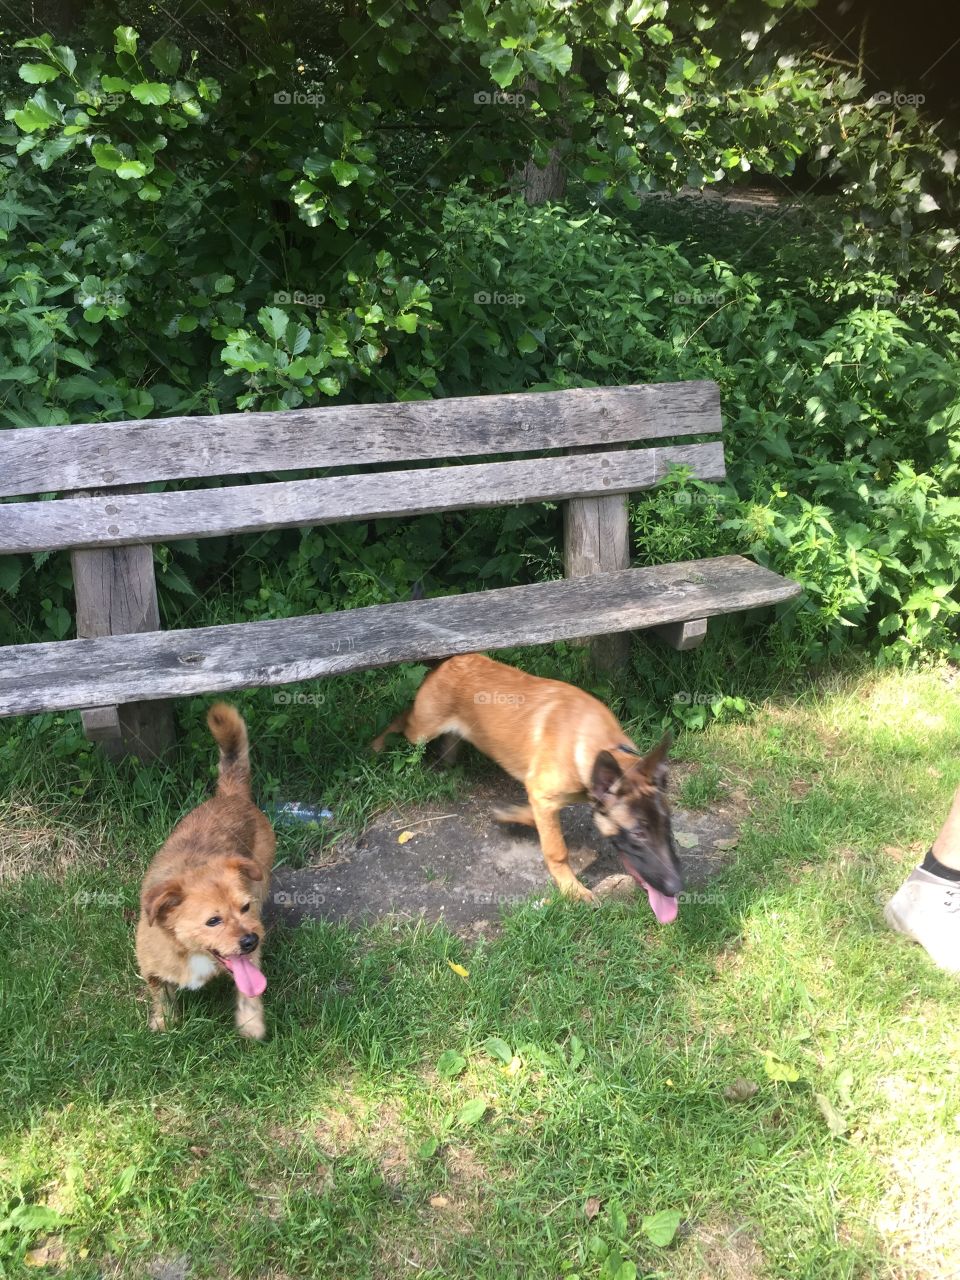 2 dogs at a wooden bench